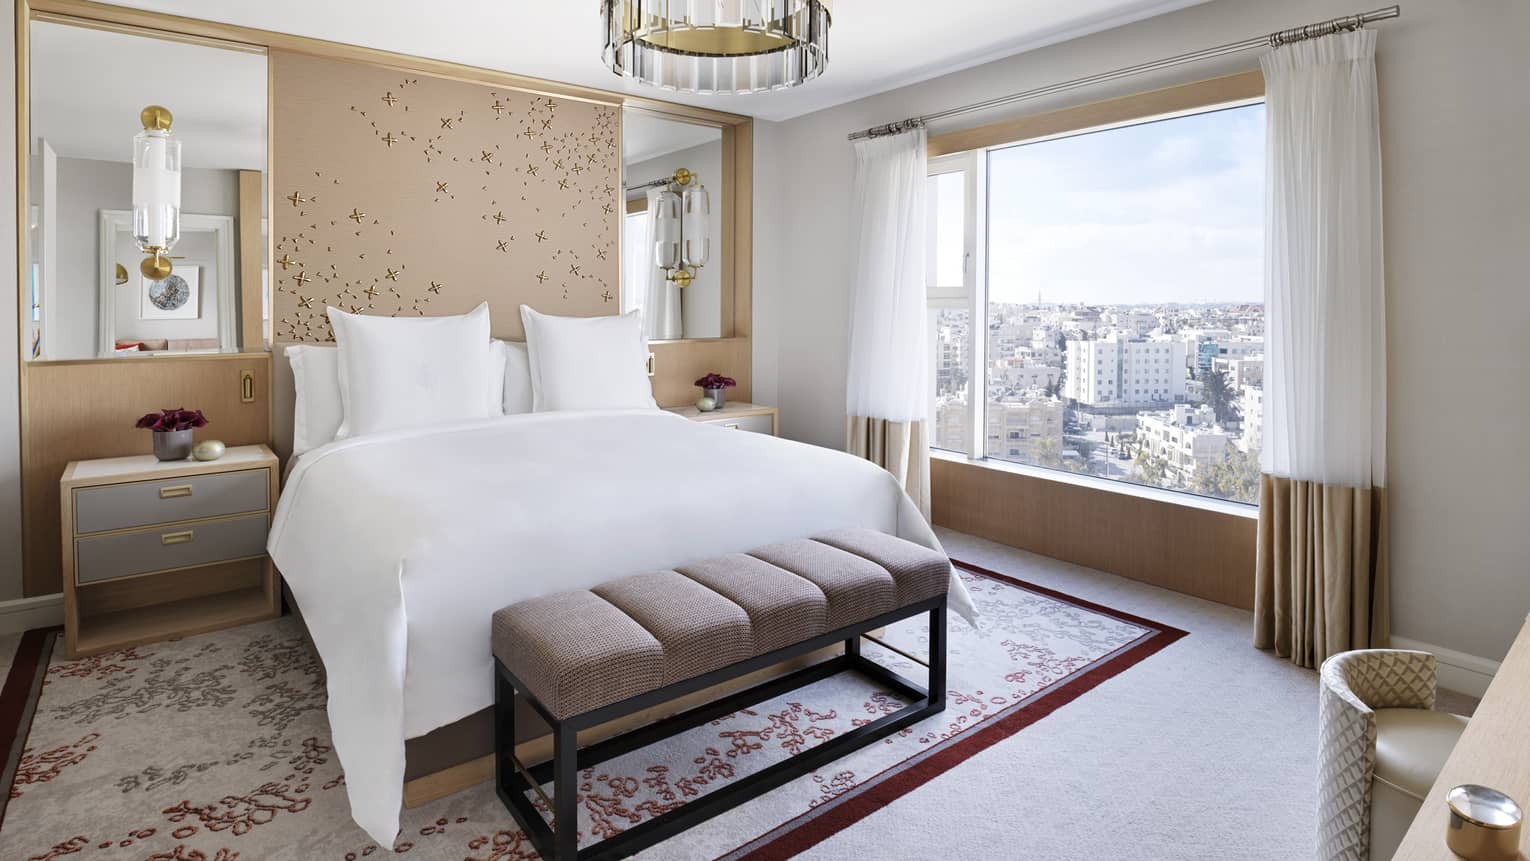 A floral-themed room with a large bed in the centre, and a cityscape view. 